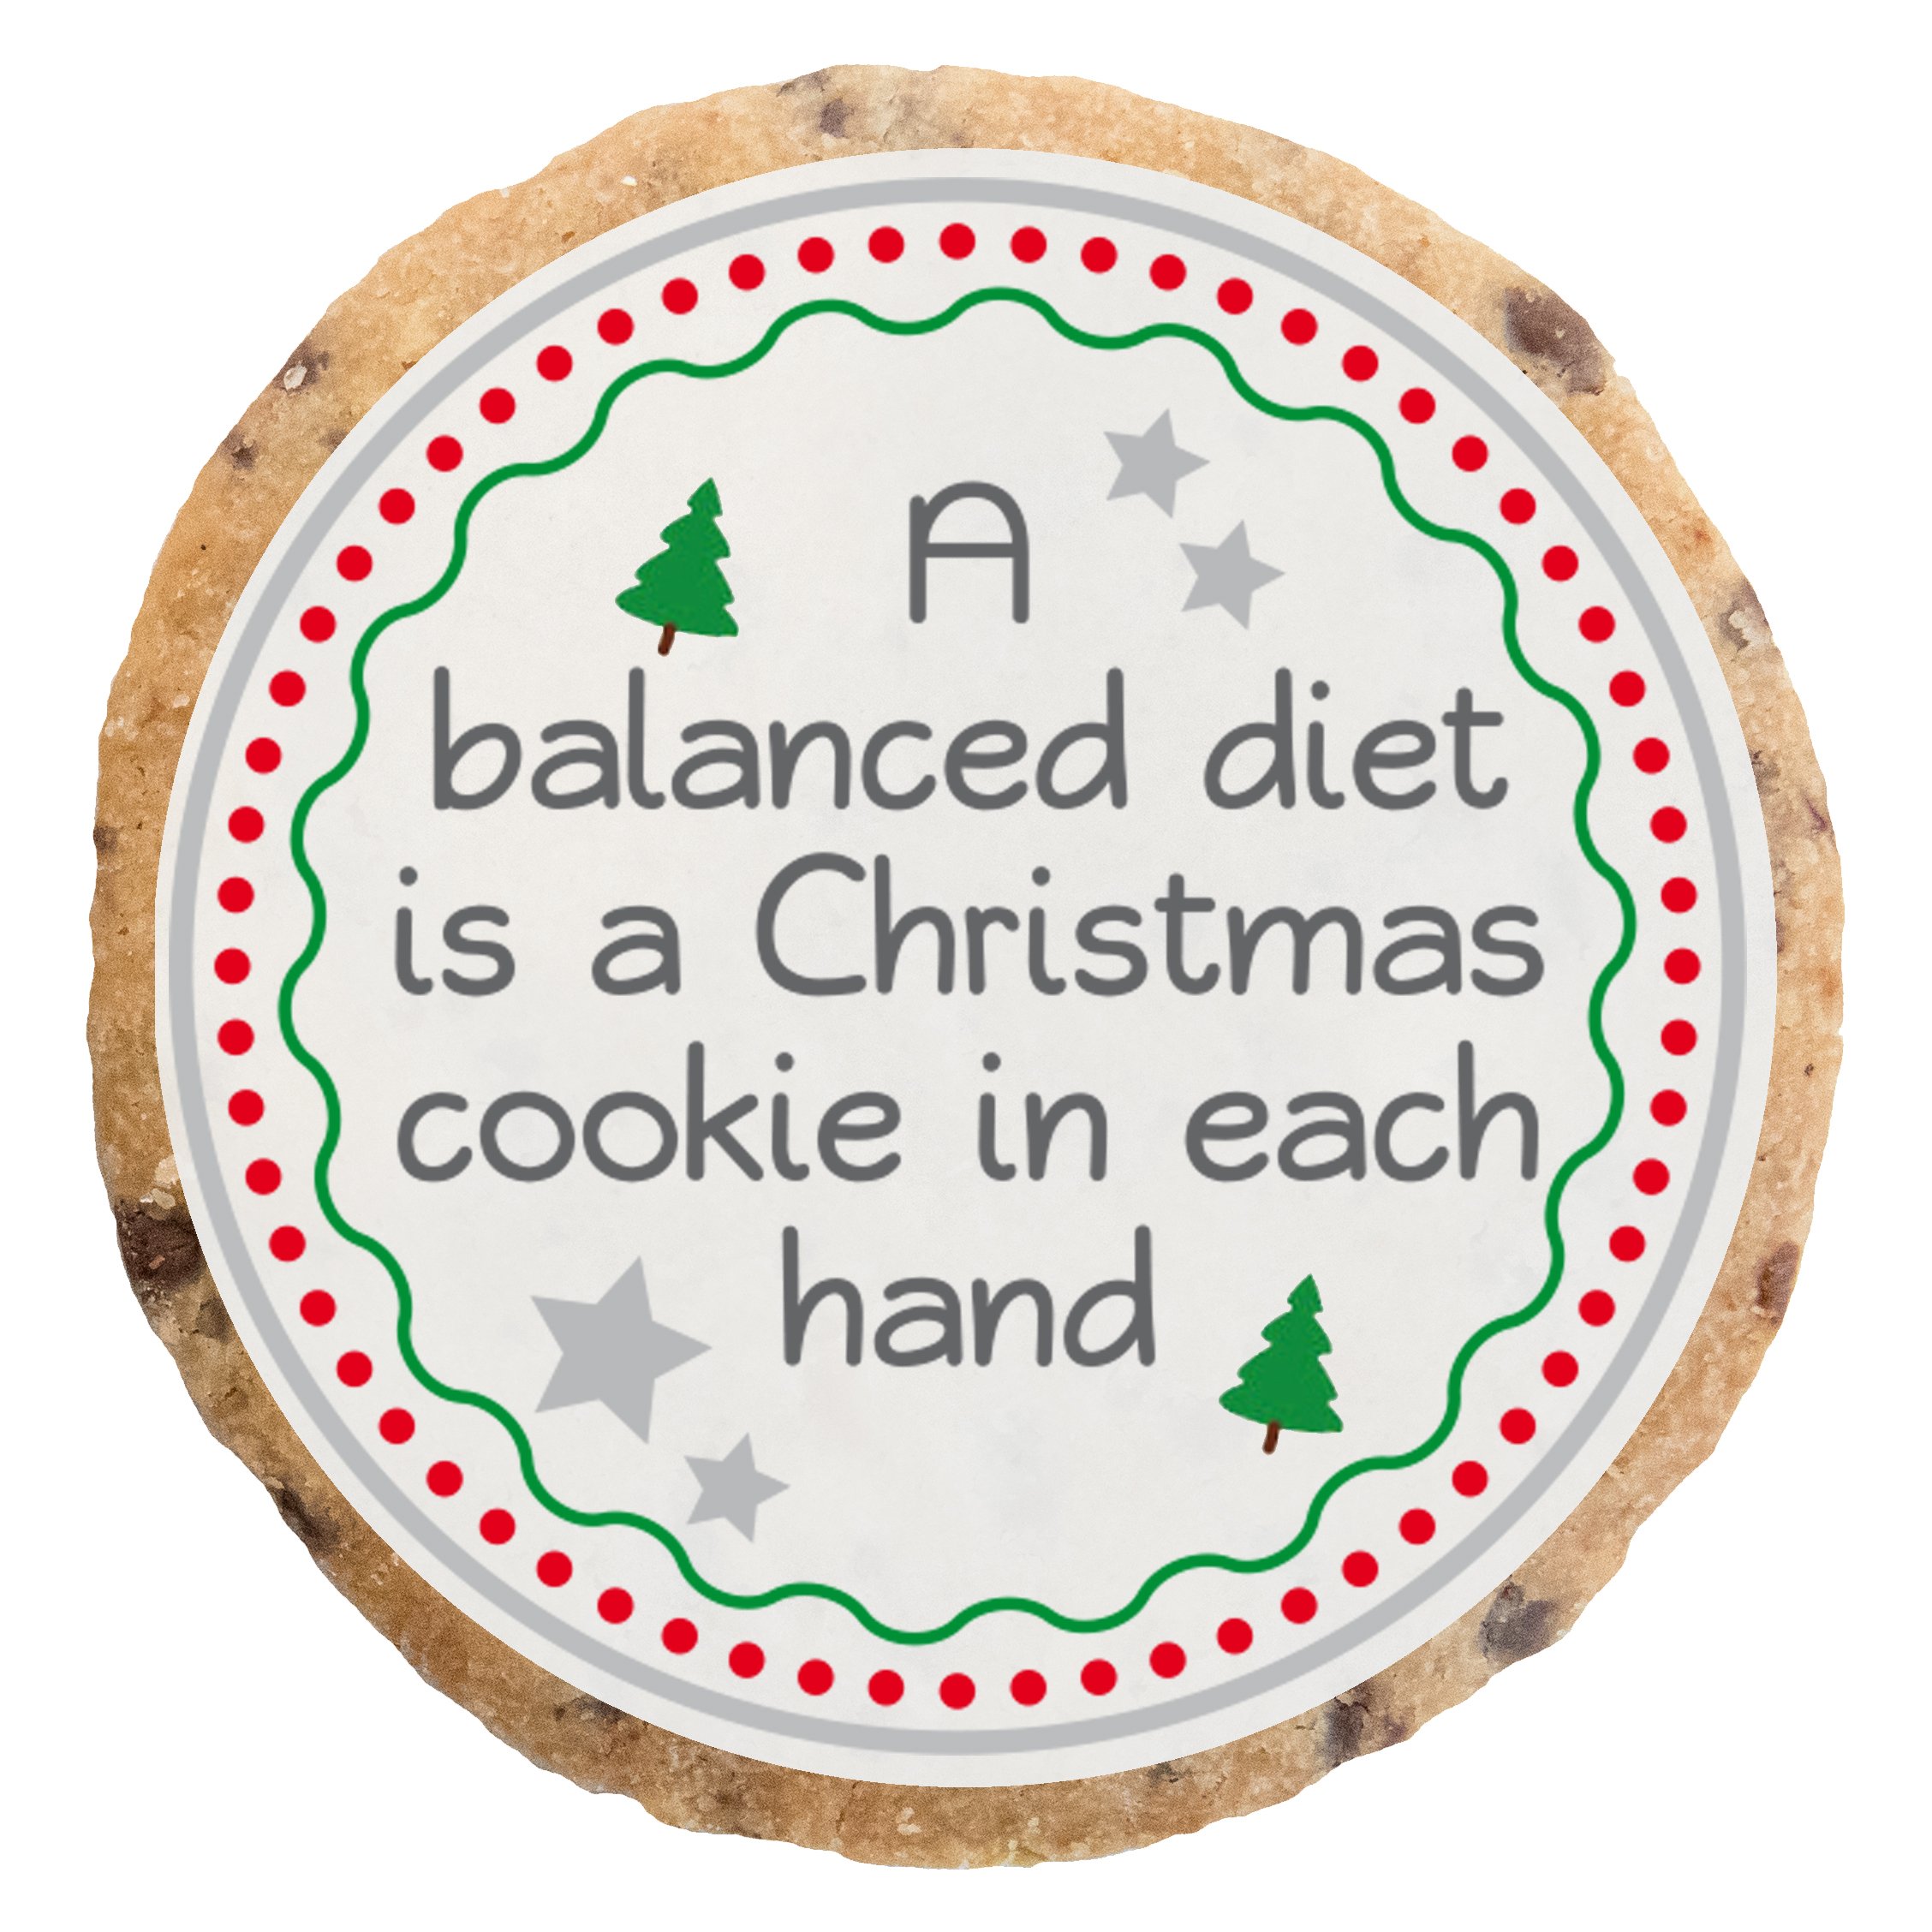 "A balanced diet is a christmas cookie in each hand" KEKS